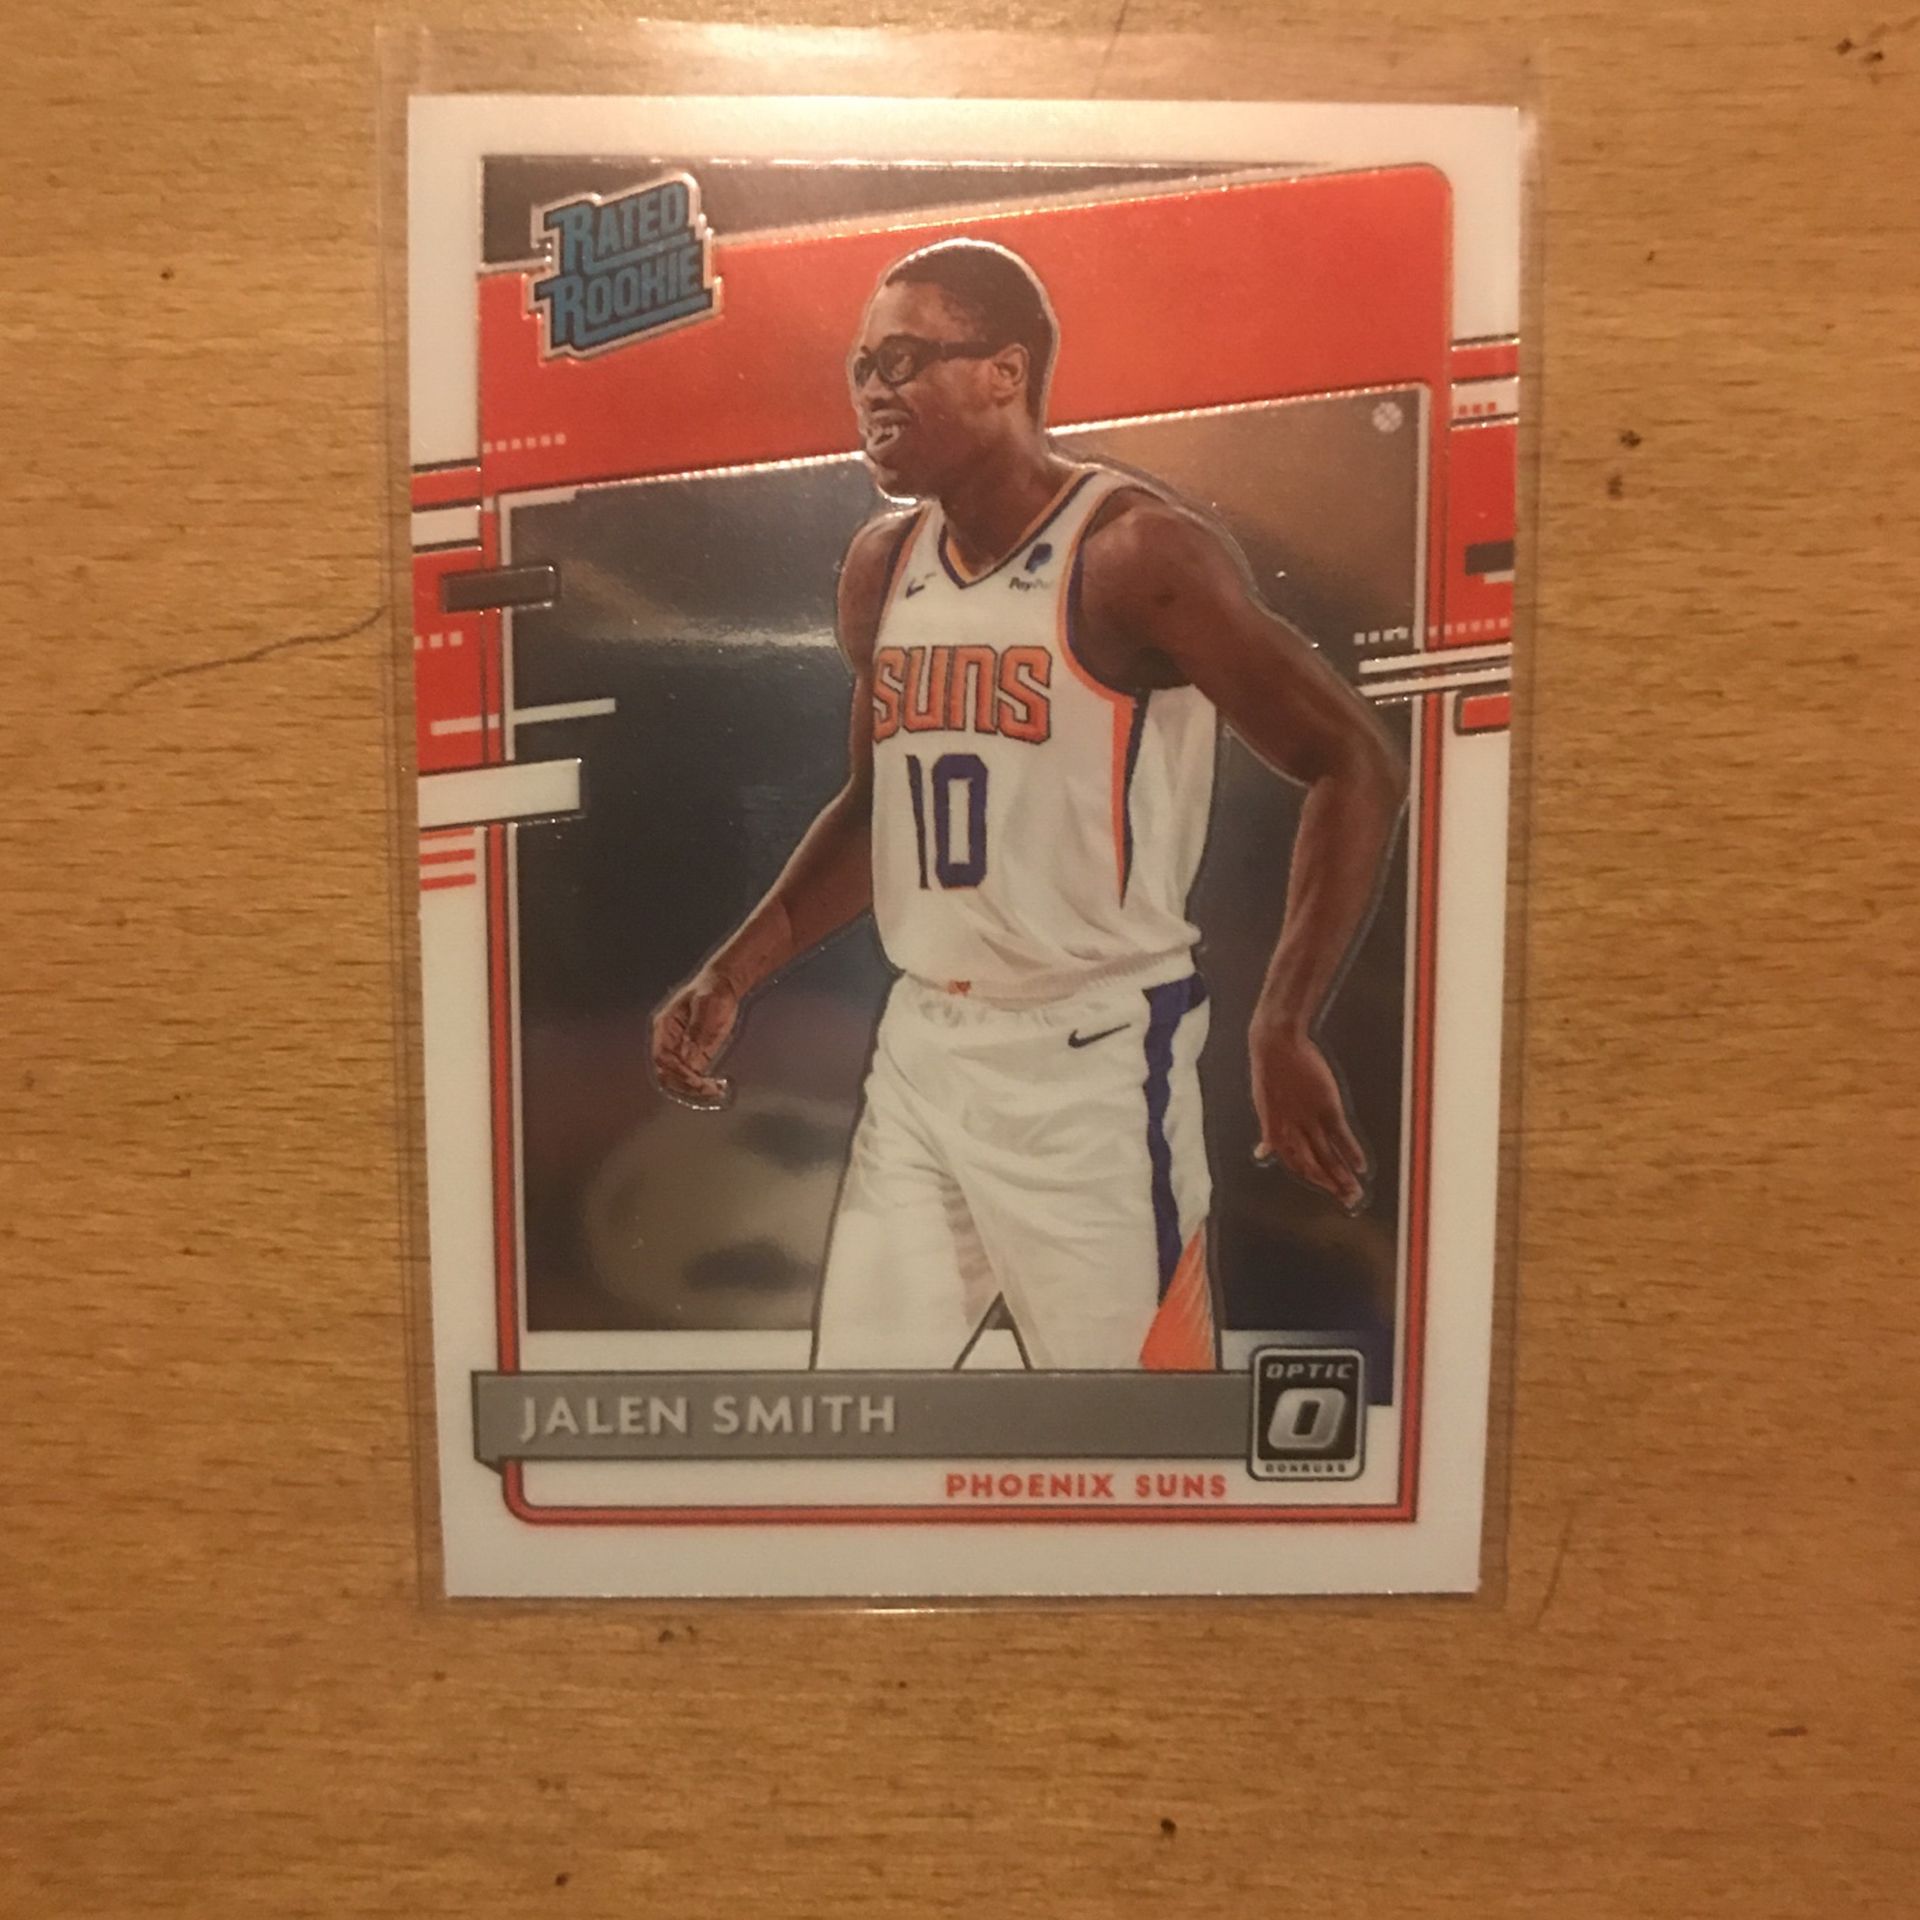 2021 OPTIC JALEN SMITH RATED ROOKIE CARD 